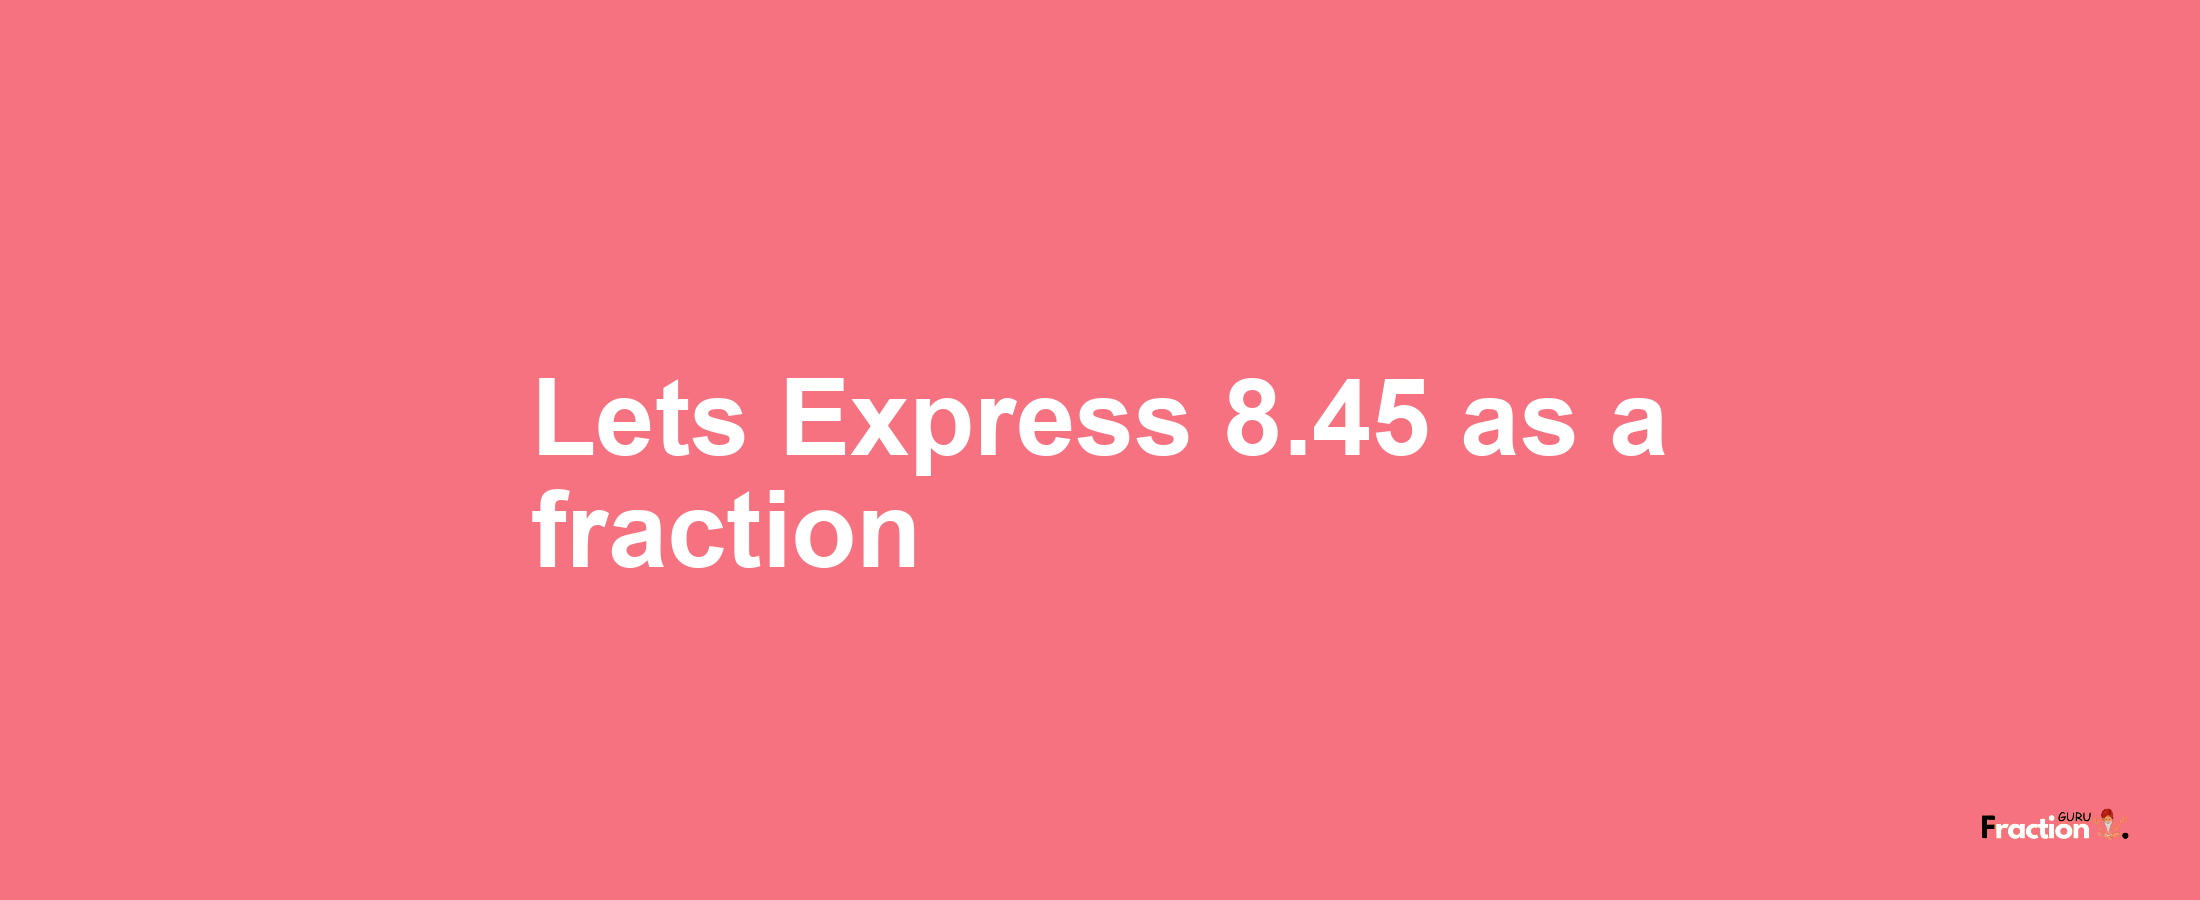 Lets Express 8.45 as afraction